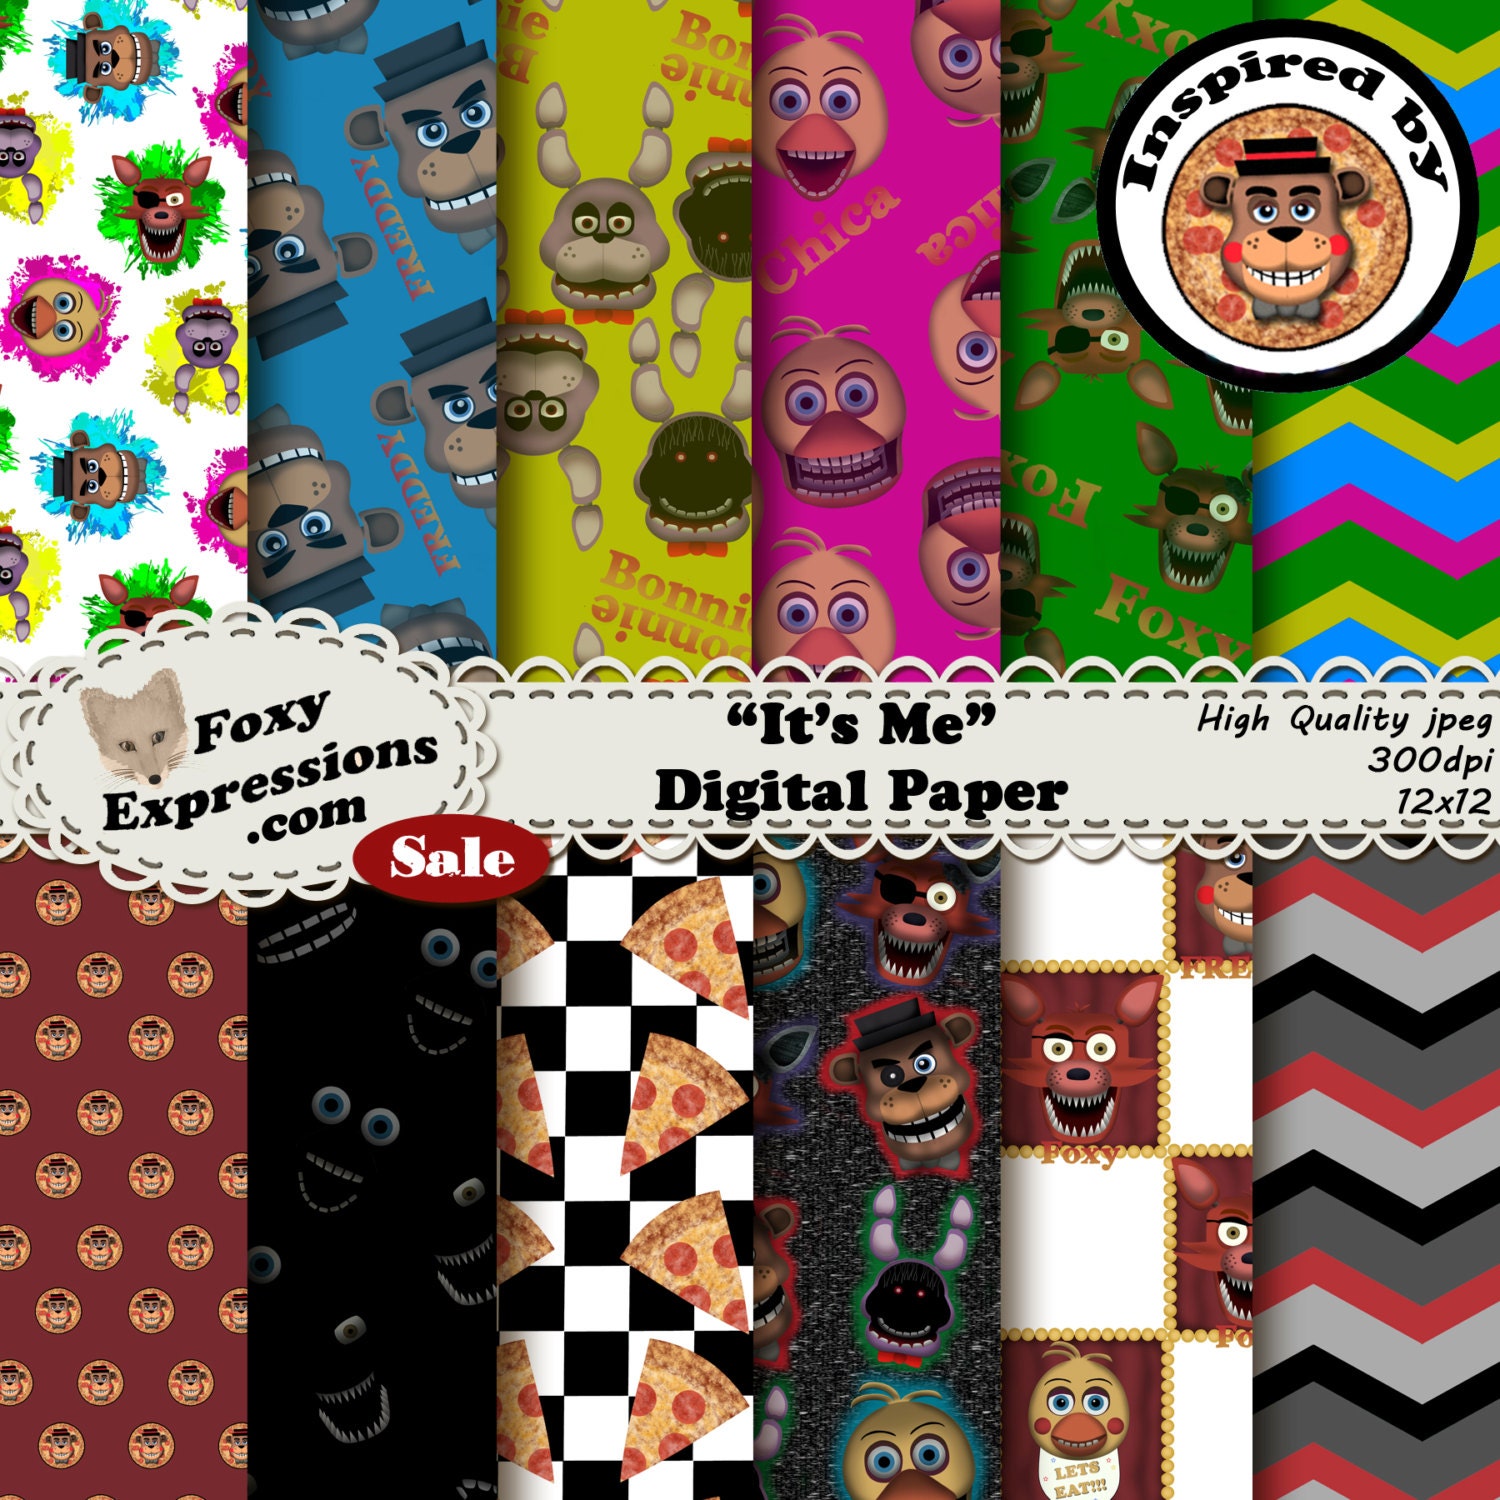 Five Nights at Freddy's - FNAF - Foxy - It's Me! Art Print for